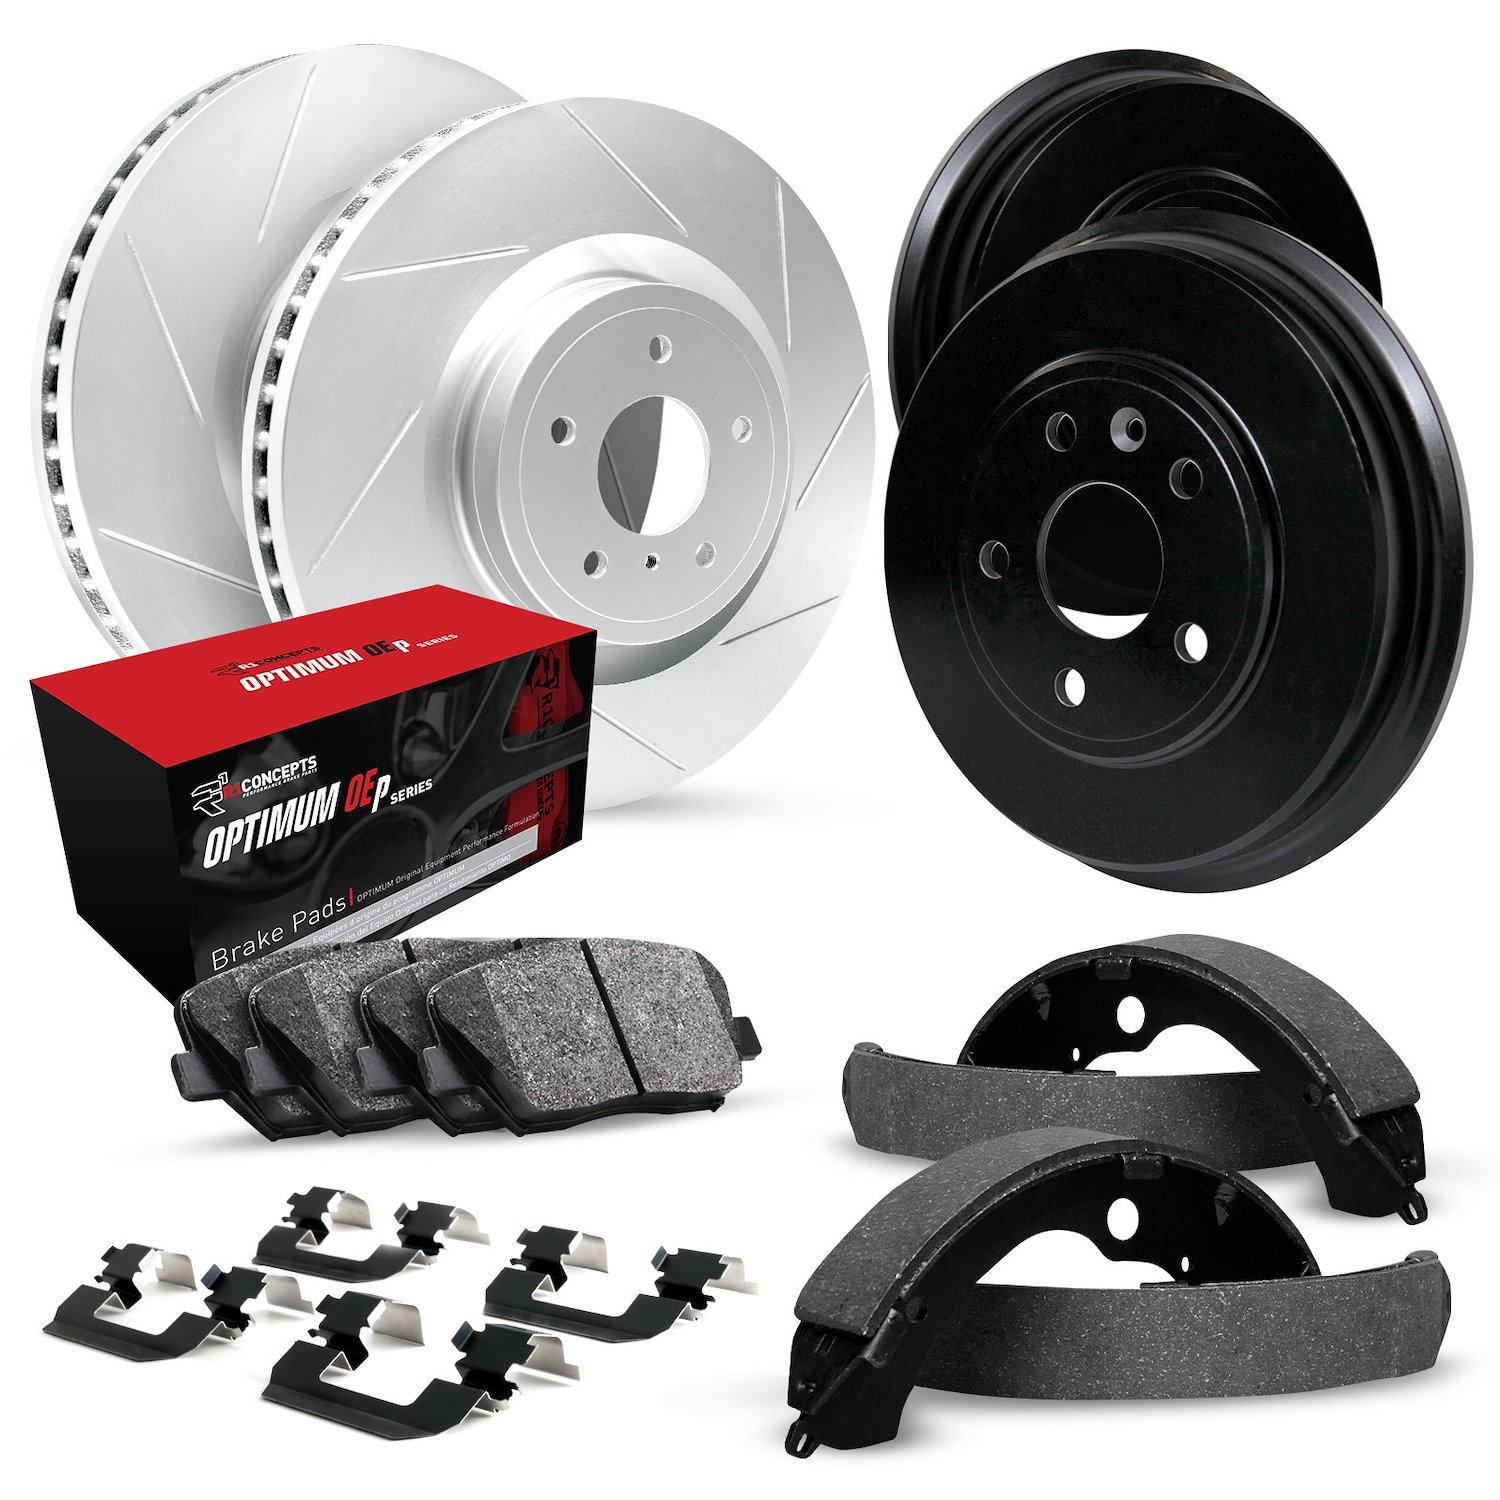 GEO-Carbon Slotted Brake Rotor & Drum Set w/Optimum OE Pads, Shoes, & Hardware, 1991-1991 GM, Position: Front & Rear